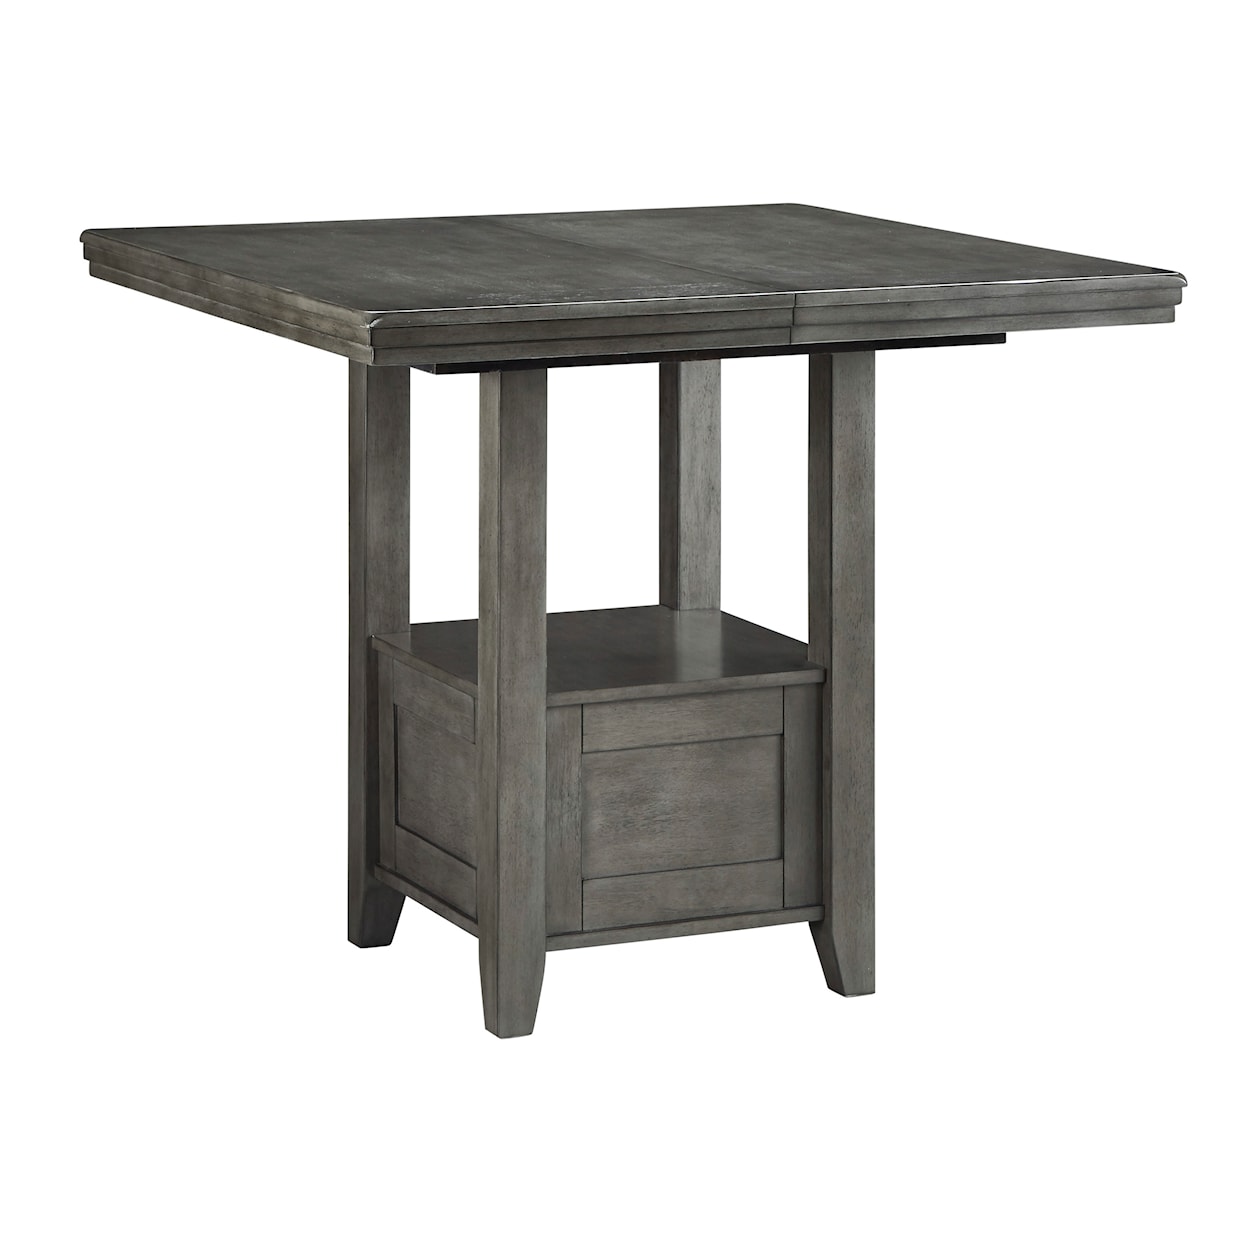 Signature Design by Ashley Hallanden Counter Height Dining Extension Table